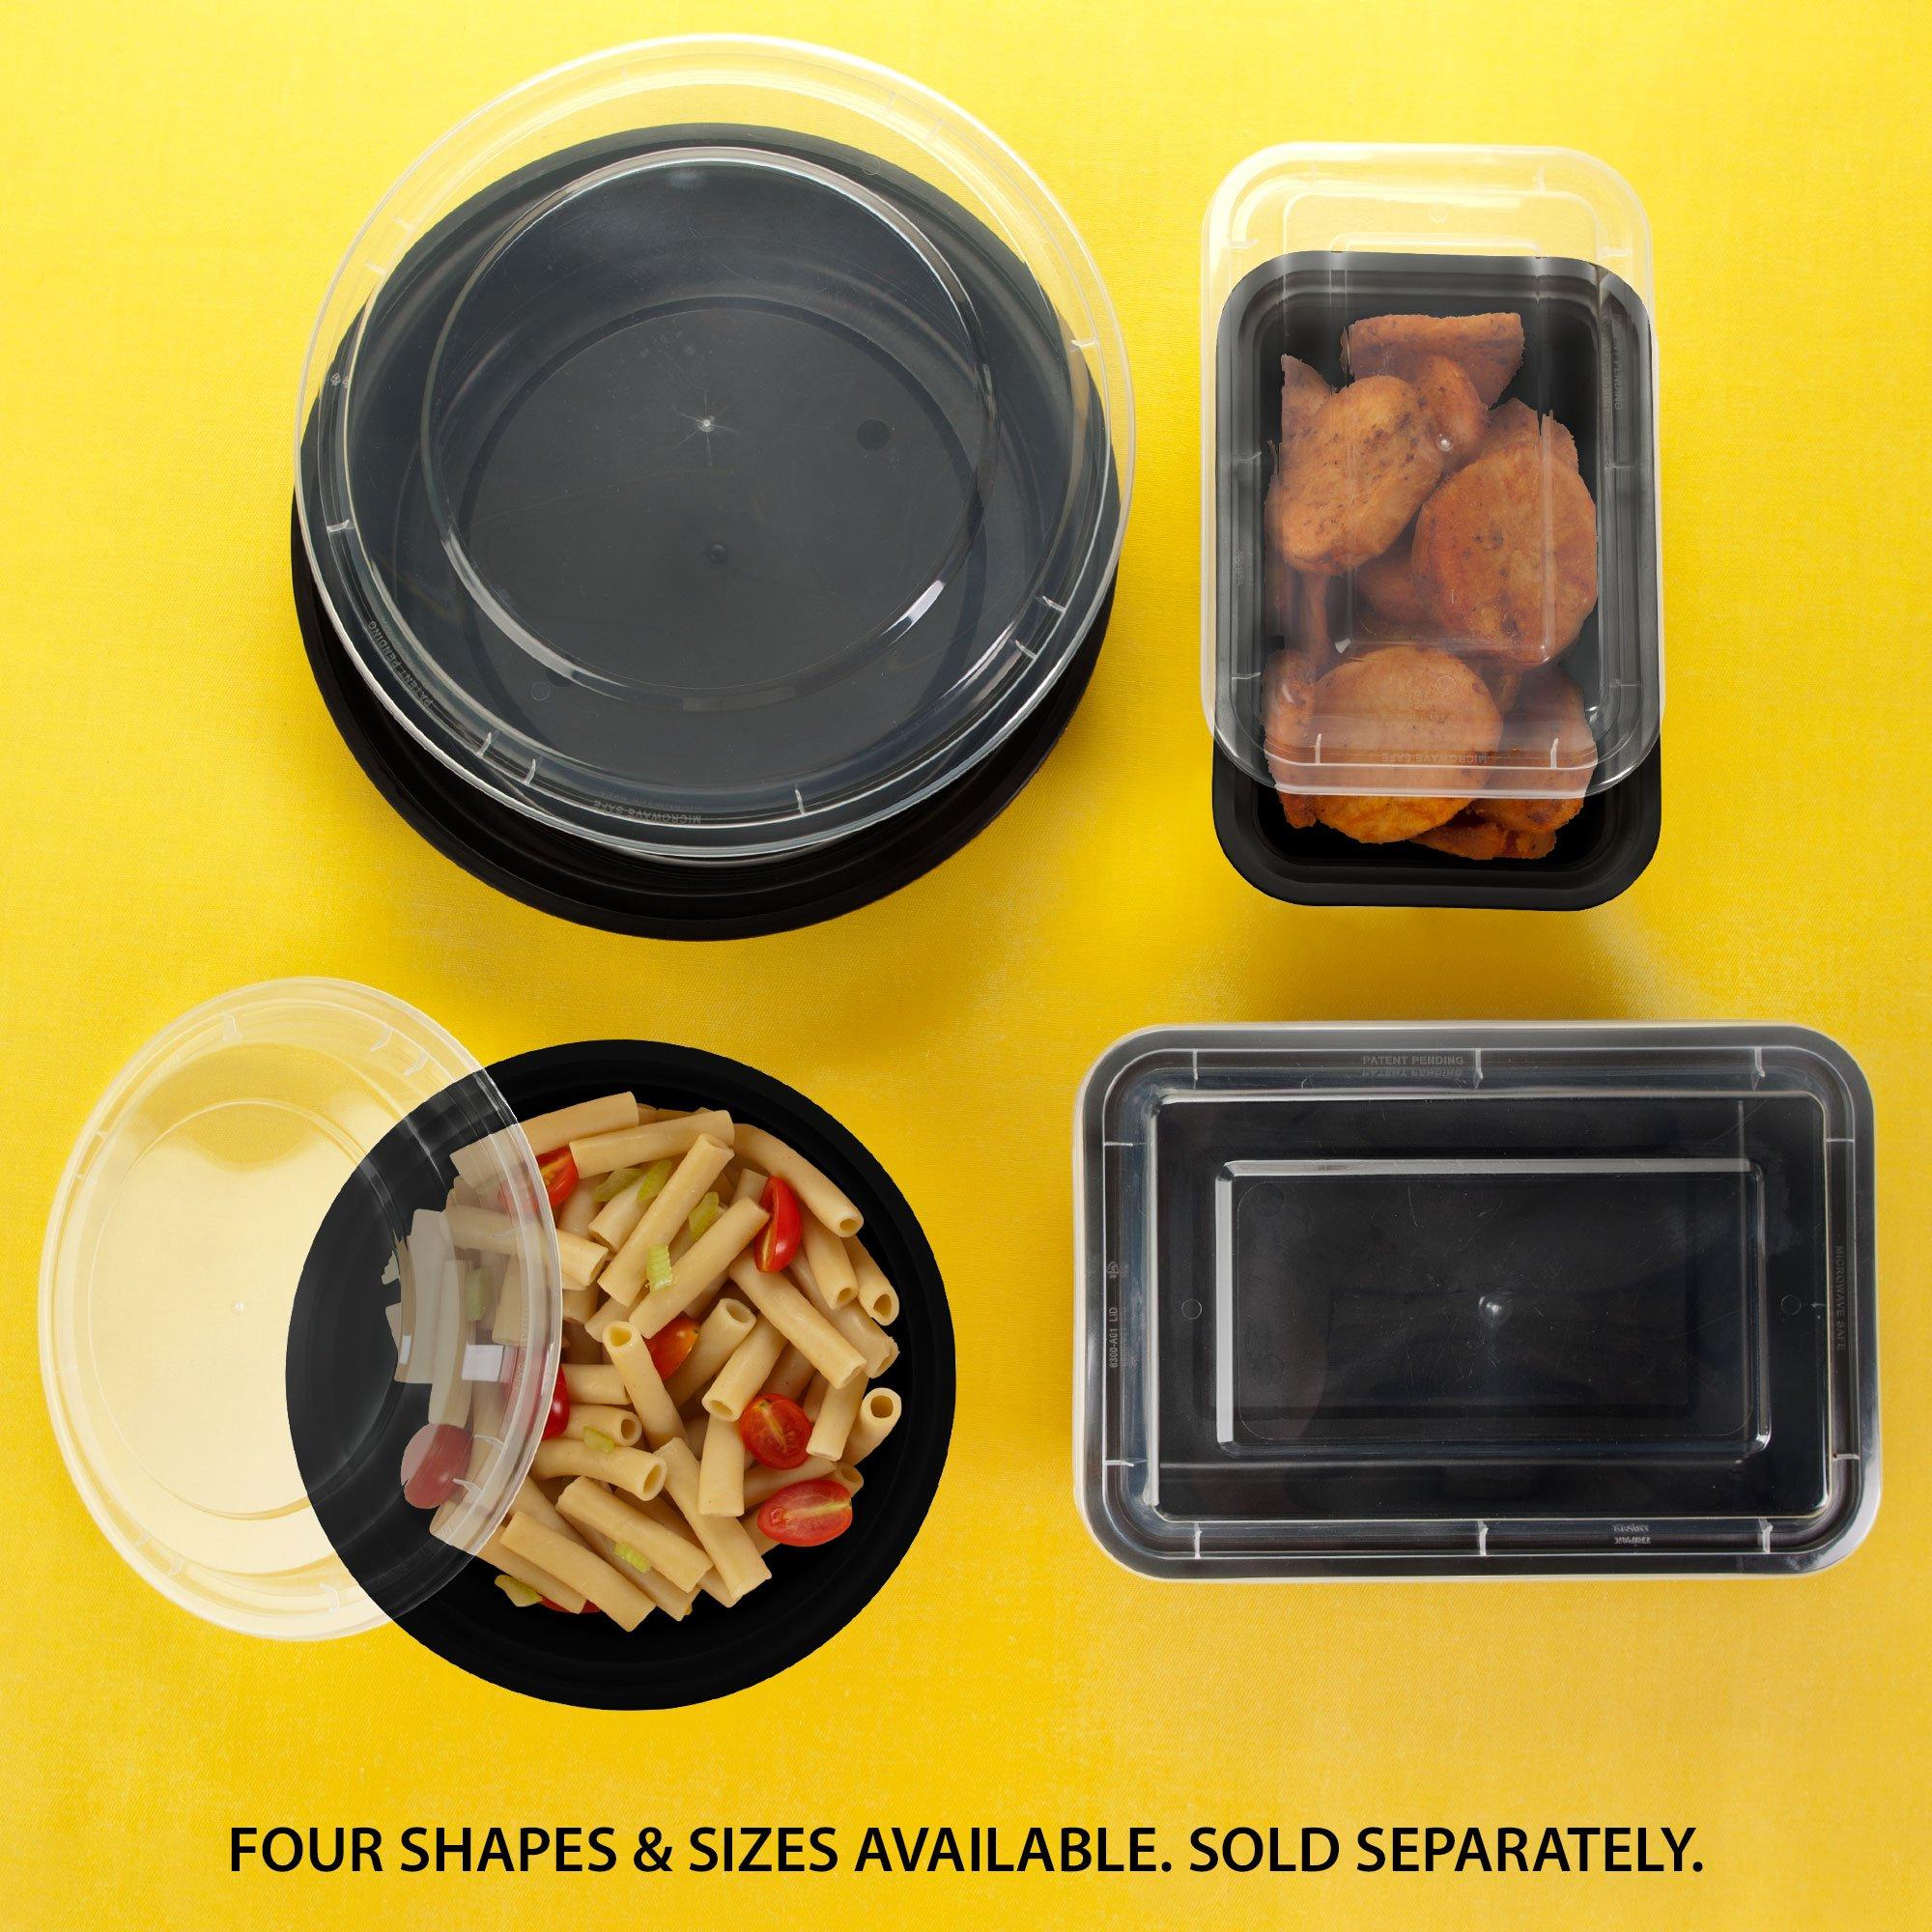 Round Plastic Microwave Tray Containers, 7in, 32oz, 6ct